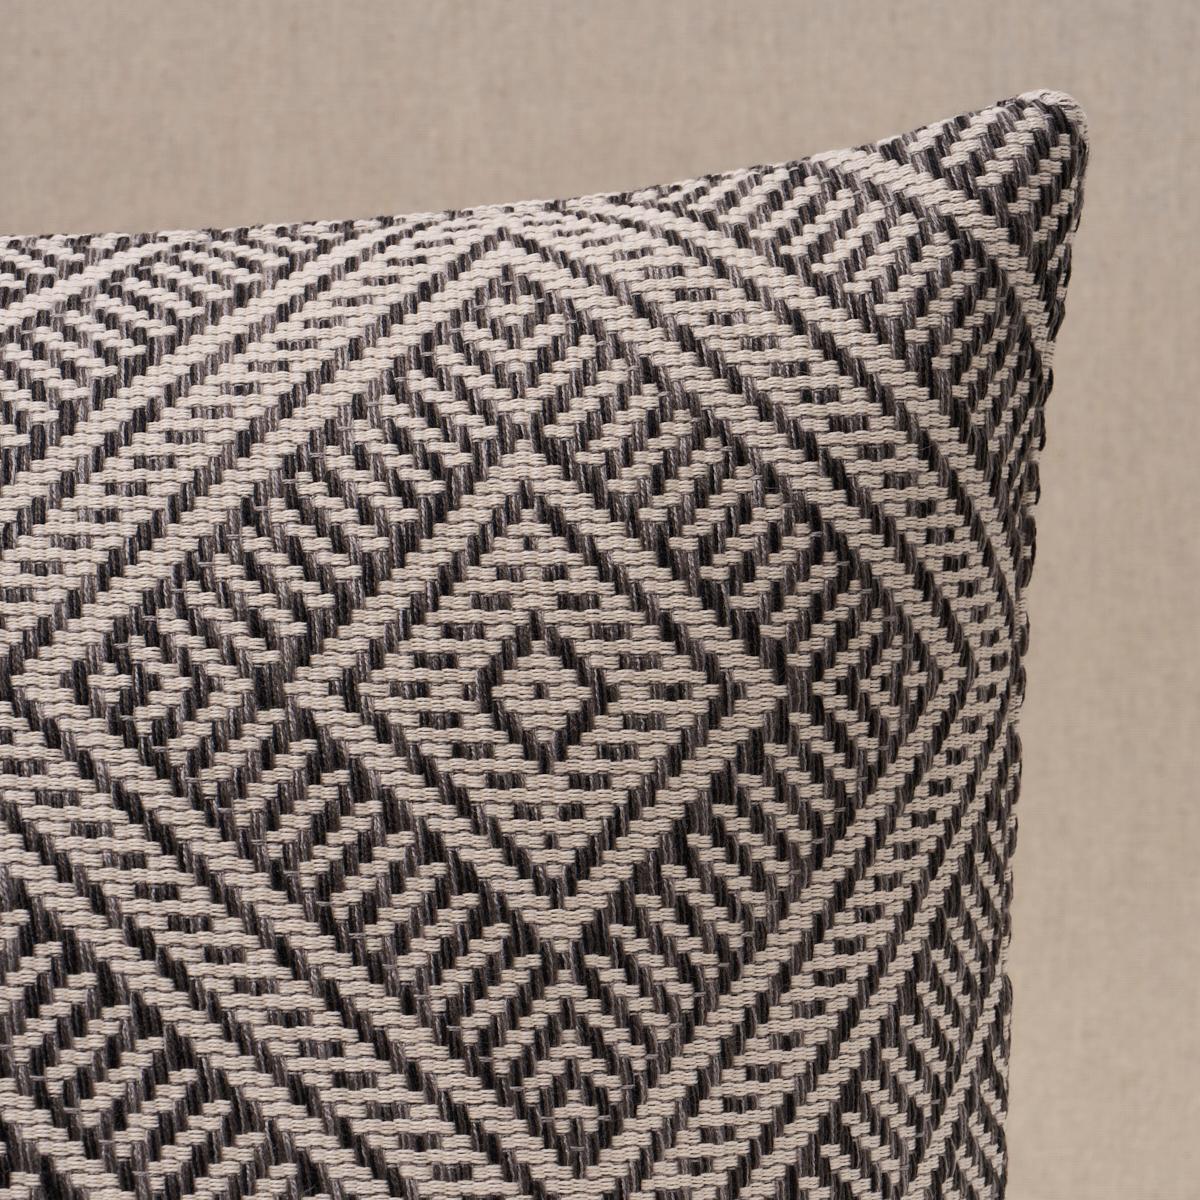 This pillow features Tortola with a knife edge finish. Inspired by basket designs, this concentric diamond pattern is woven from Dralon acrylic yarns. Textured and extremely durable, it is suitable for both indoor or outdoor settings. Pillow